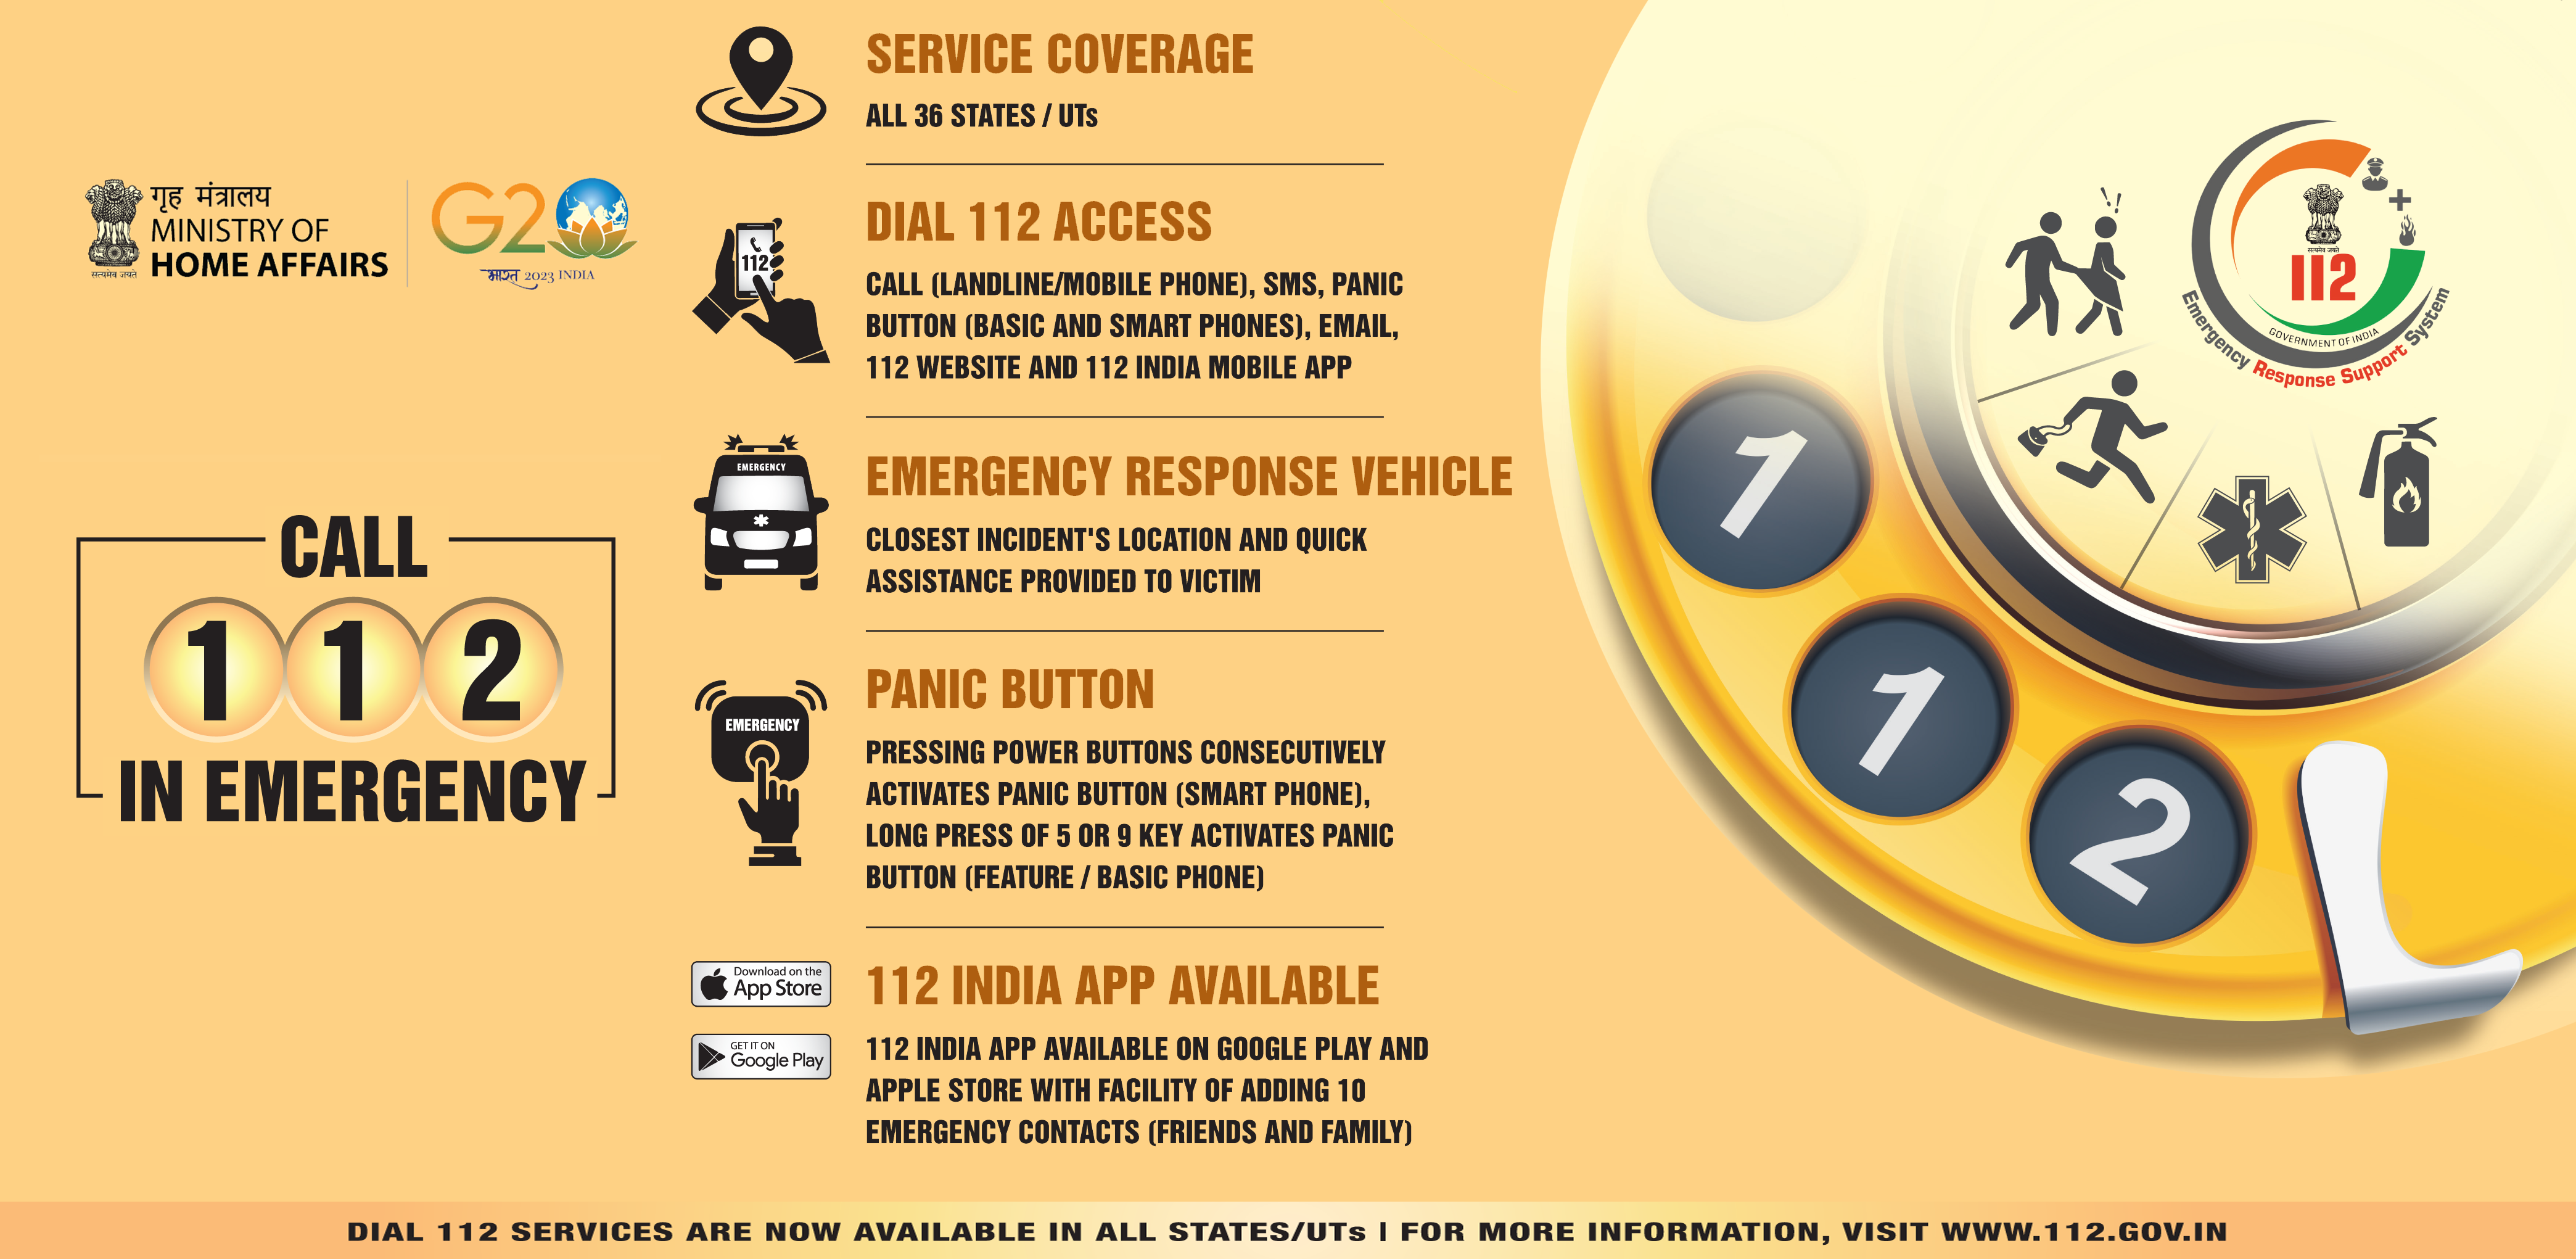 Awareness of National Emergency Number - 112